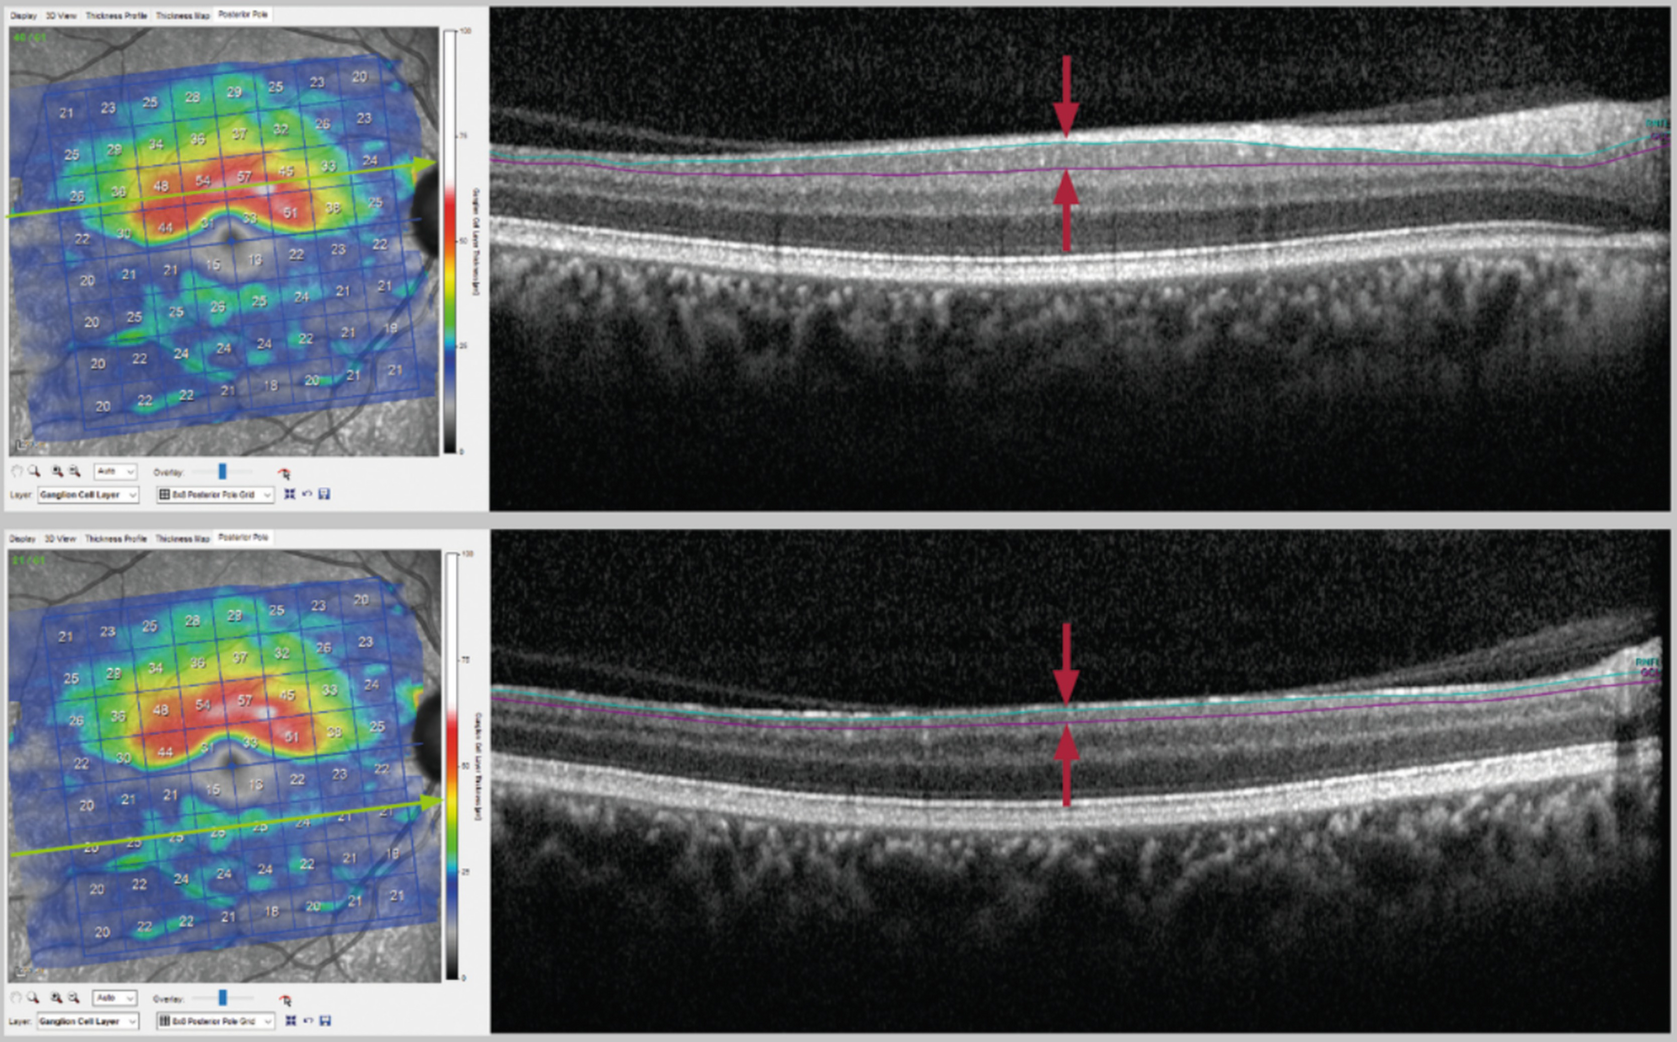 Optical Coherence Tomography (OCT): Principle and Technical ...